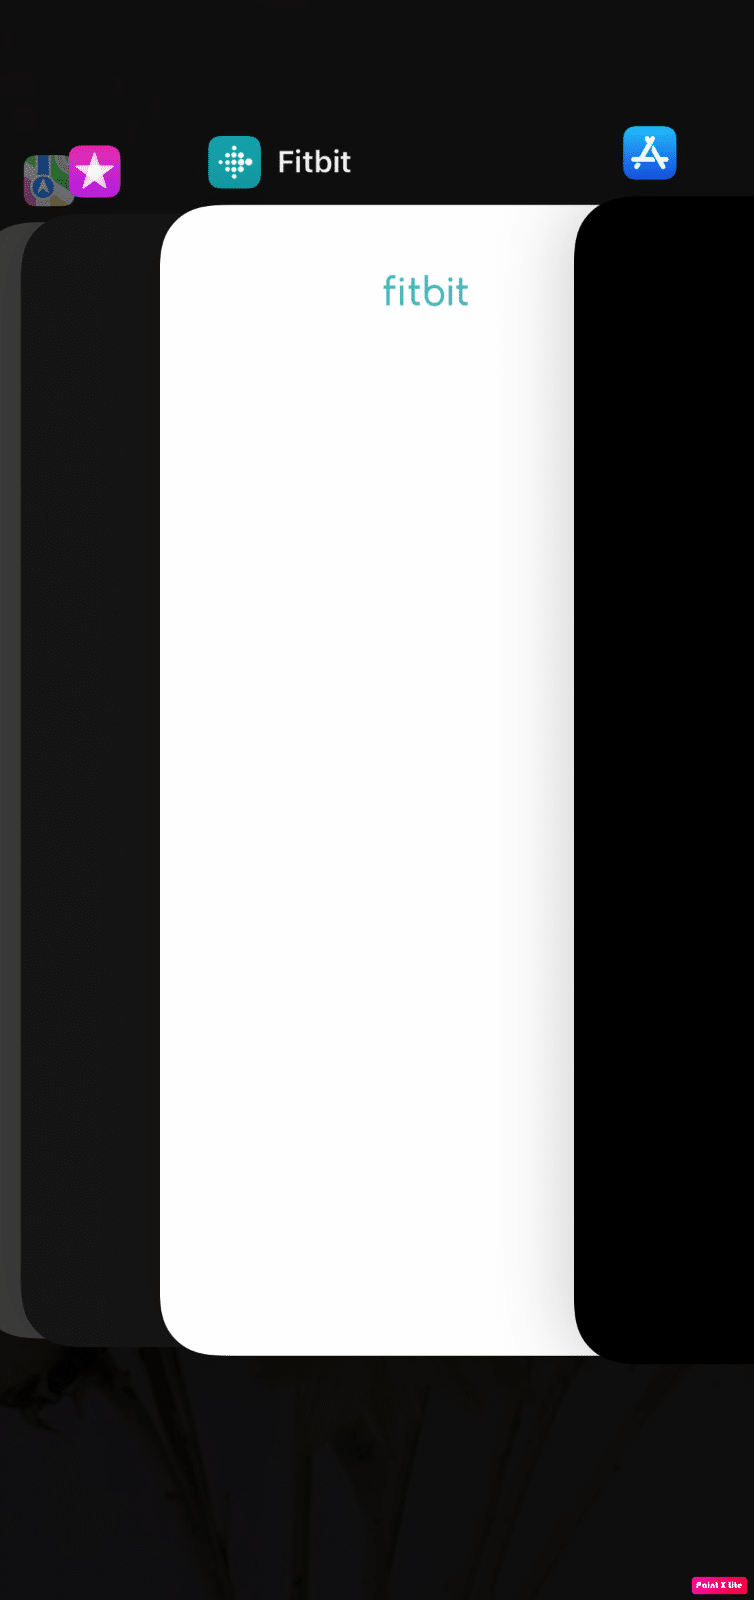 swipe up to close | screen record failed to save due to 5823